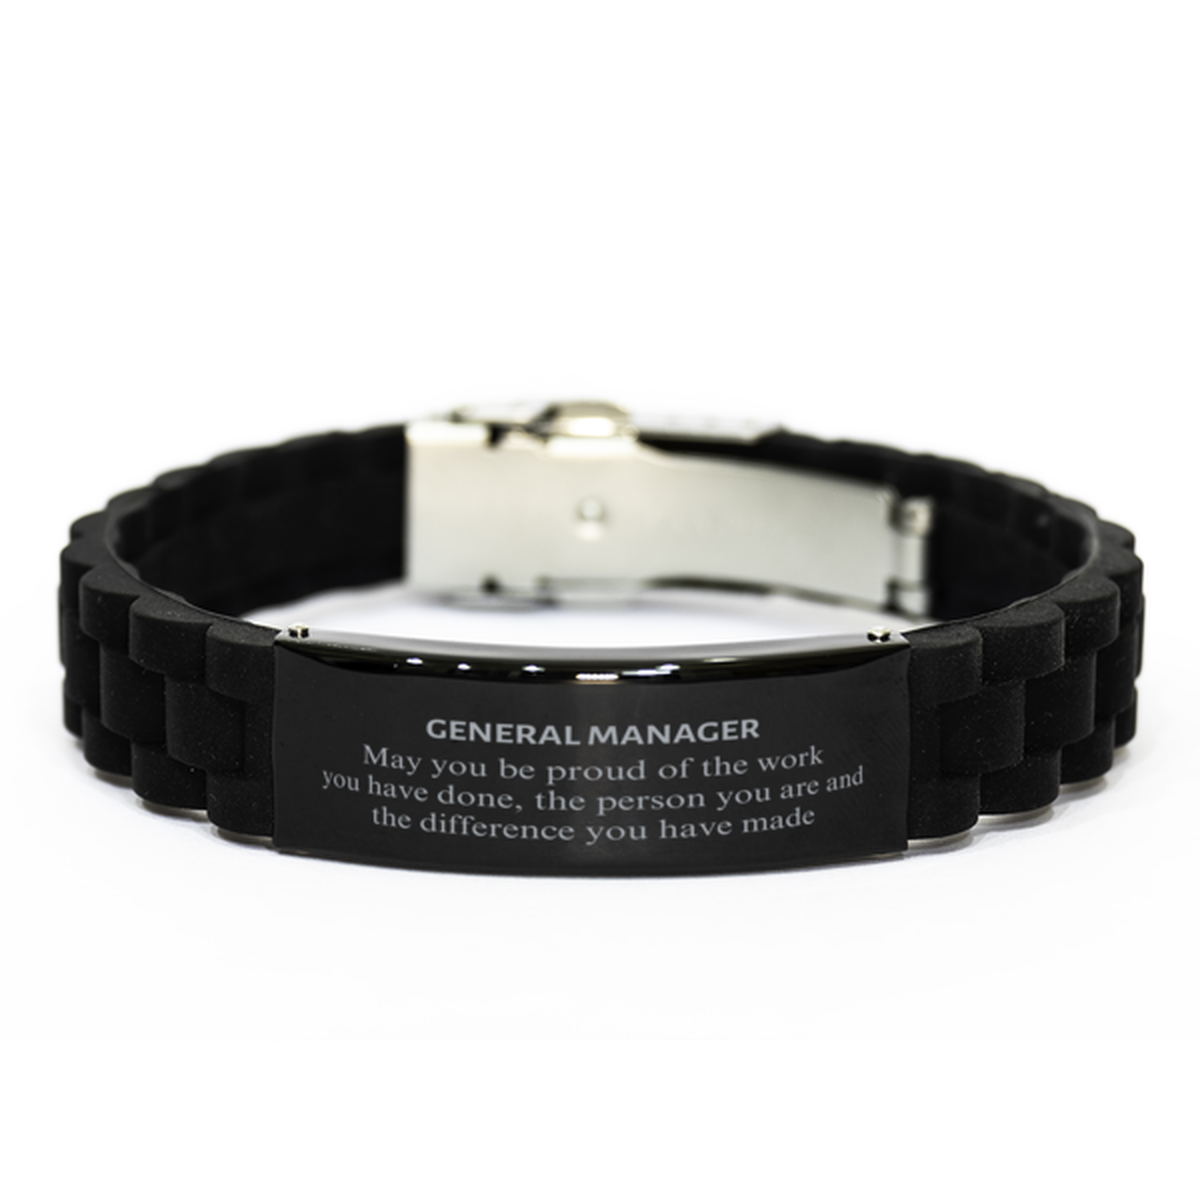 General Manager May you be proud of the work you have done, Retirement General Manager Black Glidelock Clasp Bracelet for Colleague Appreciation Gifts Amazing for General Manager